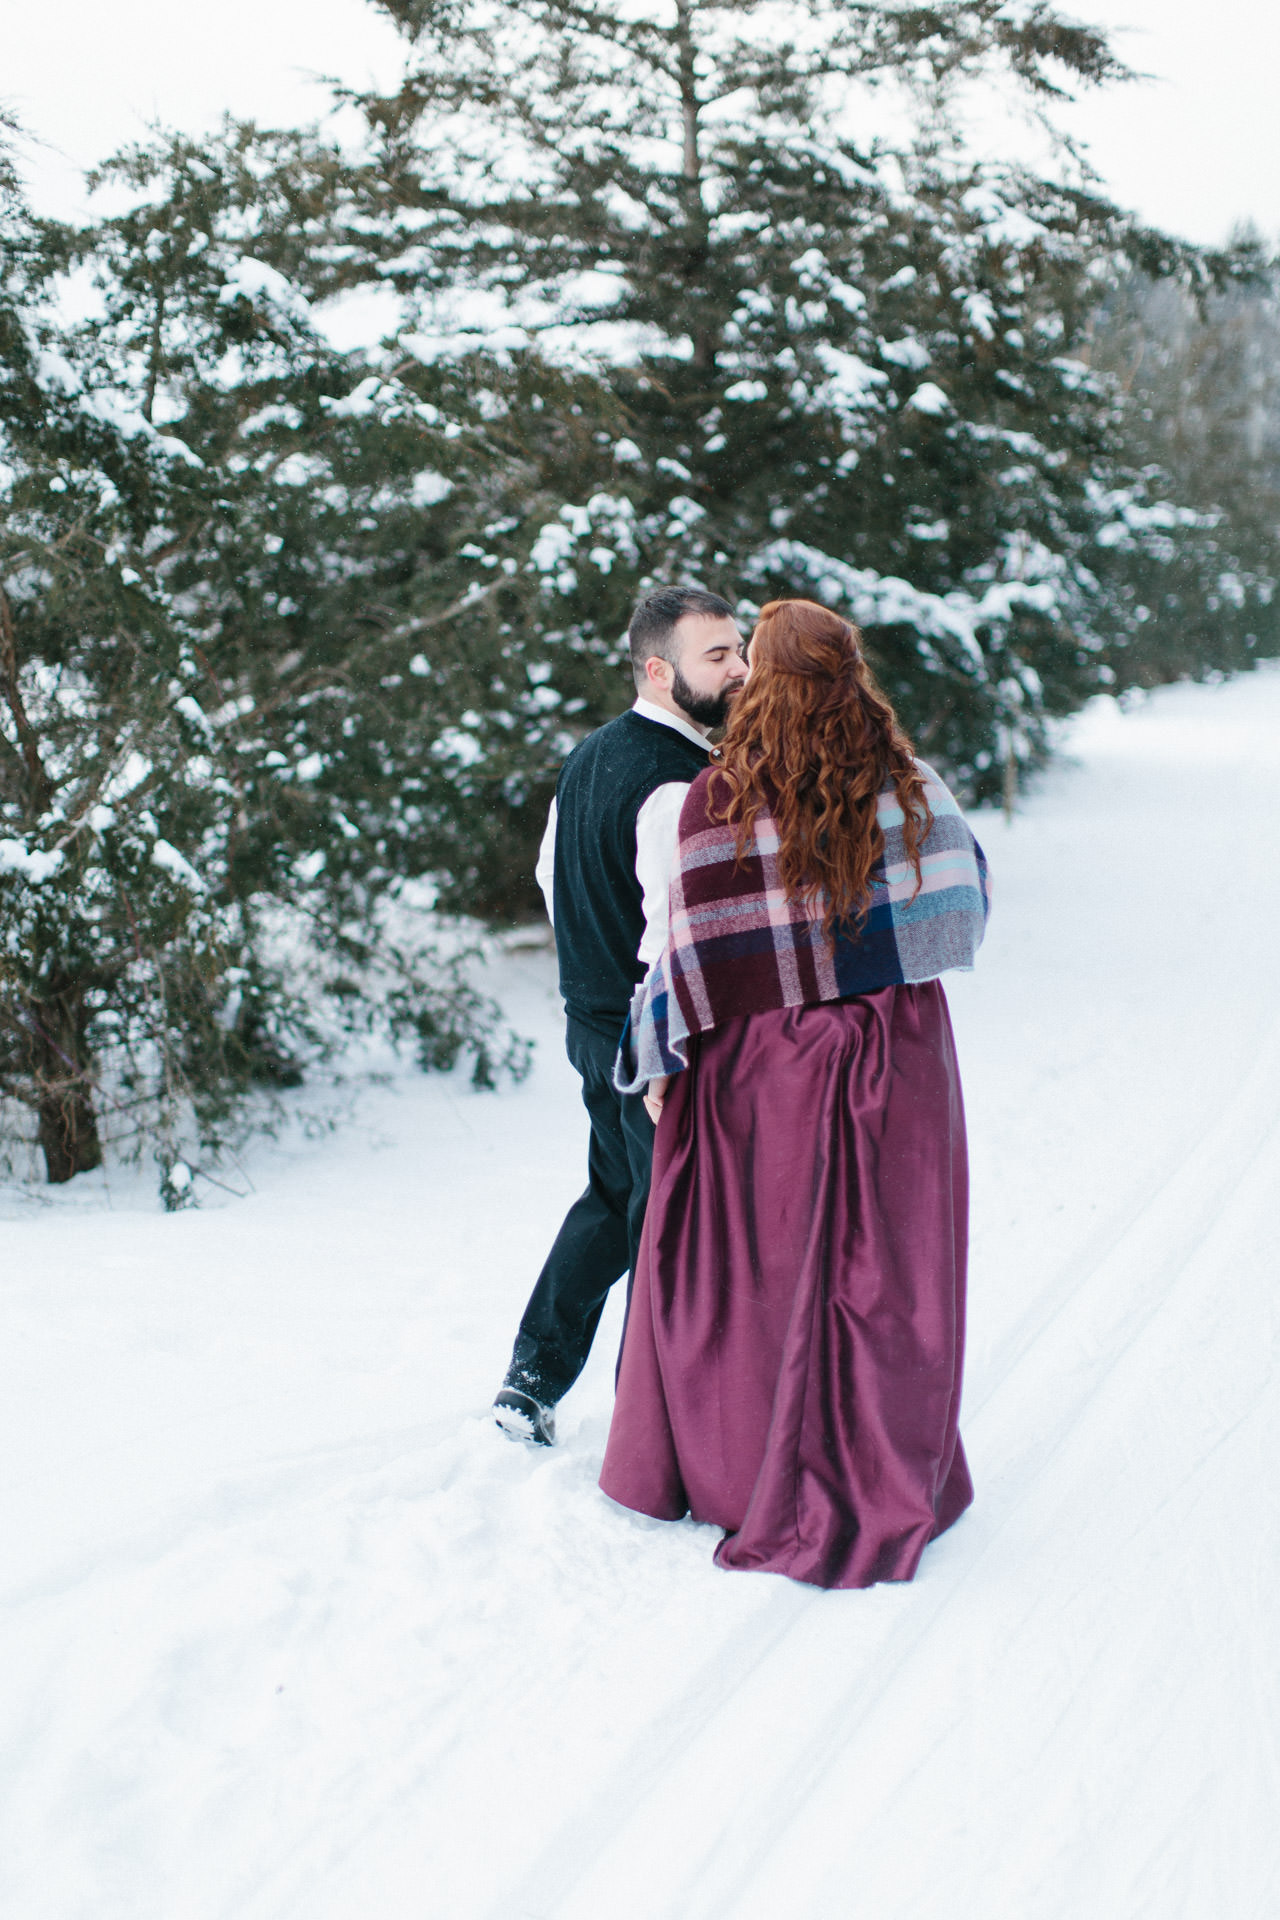 Bride and groom walking in snow and pausing for a kiss